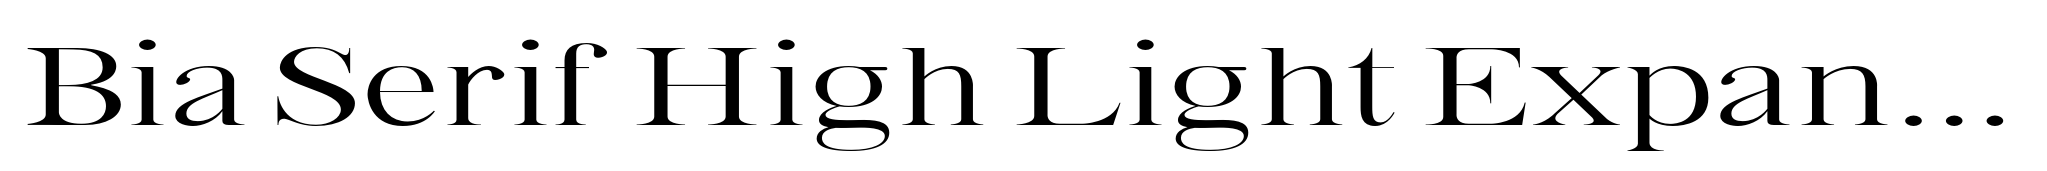 Bia Serif High Light Expanded image